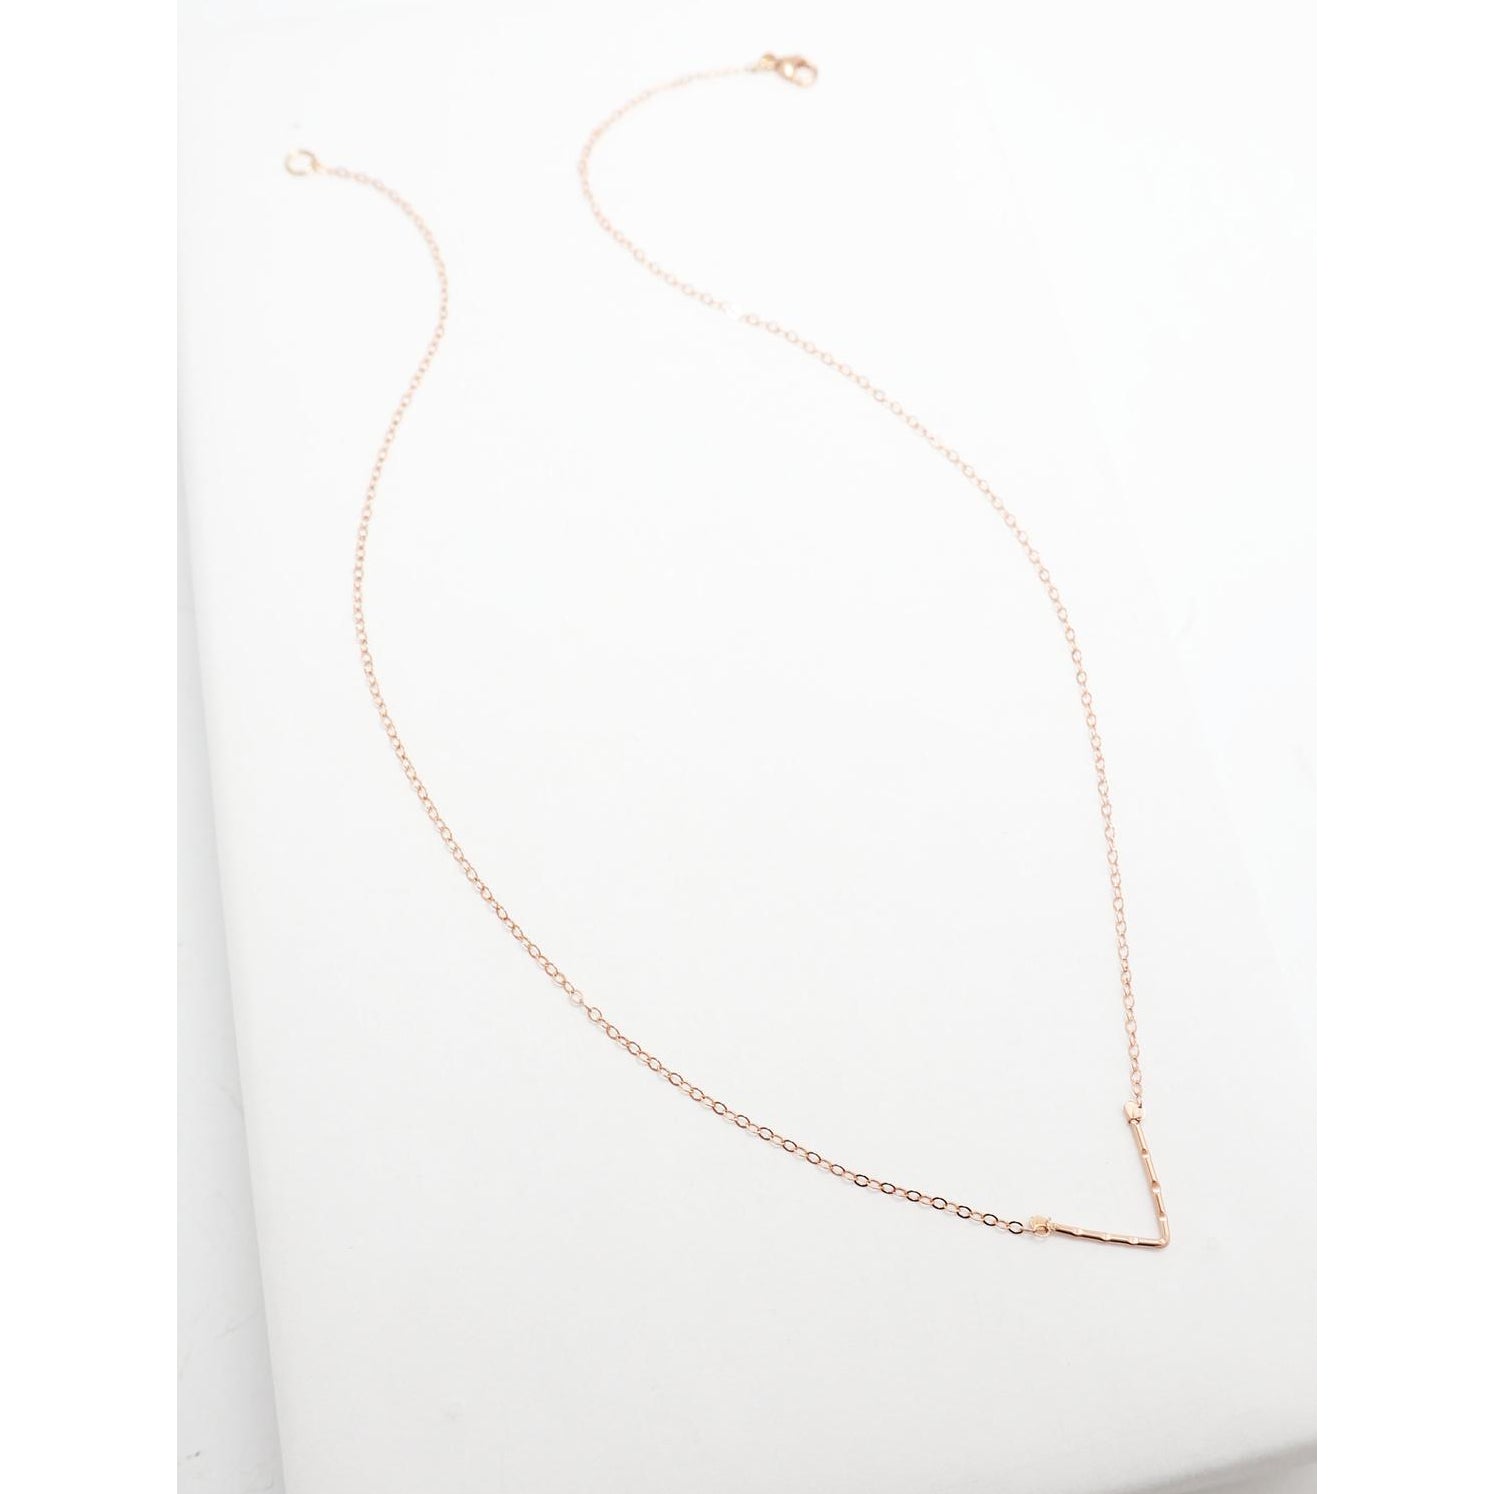 The Moxie Dotted Necklace